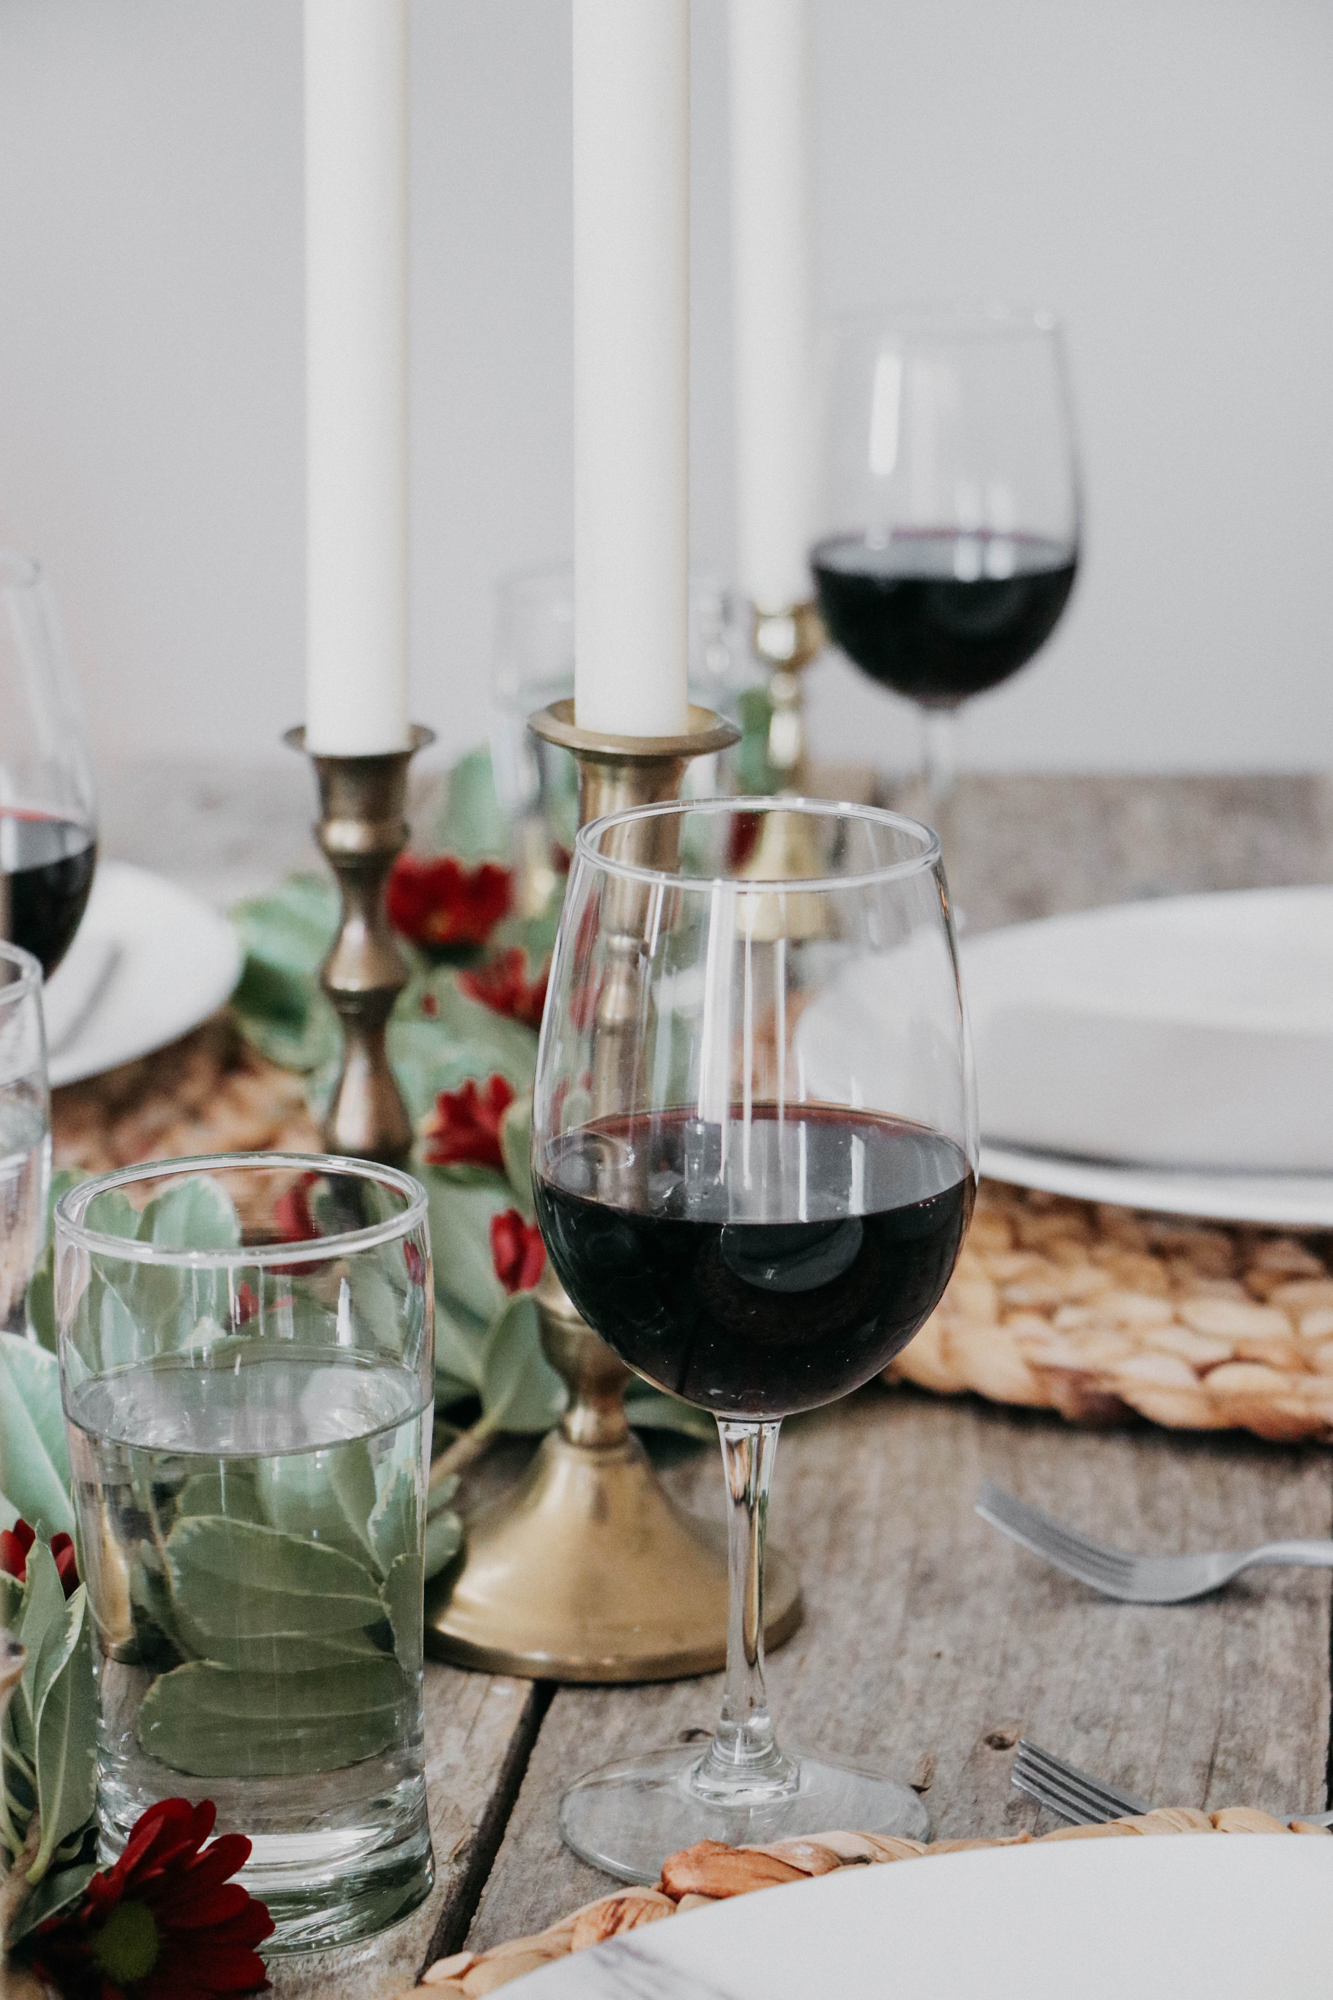 Wine Party / Wine Tasting / Layer Cake Wine offers full-bodied, complex flavors in several varieties. For this holiday shindig, I served Layer Cake's Cabernet Sauvignon, Bourbon Barrel Cabernet, Malbec, Pinot Noir, Shiraz, Primitivo and Chardonnay. theanastasiaco.com @theanastasiaco